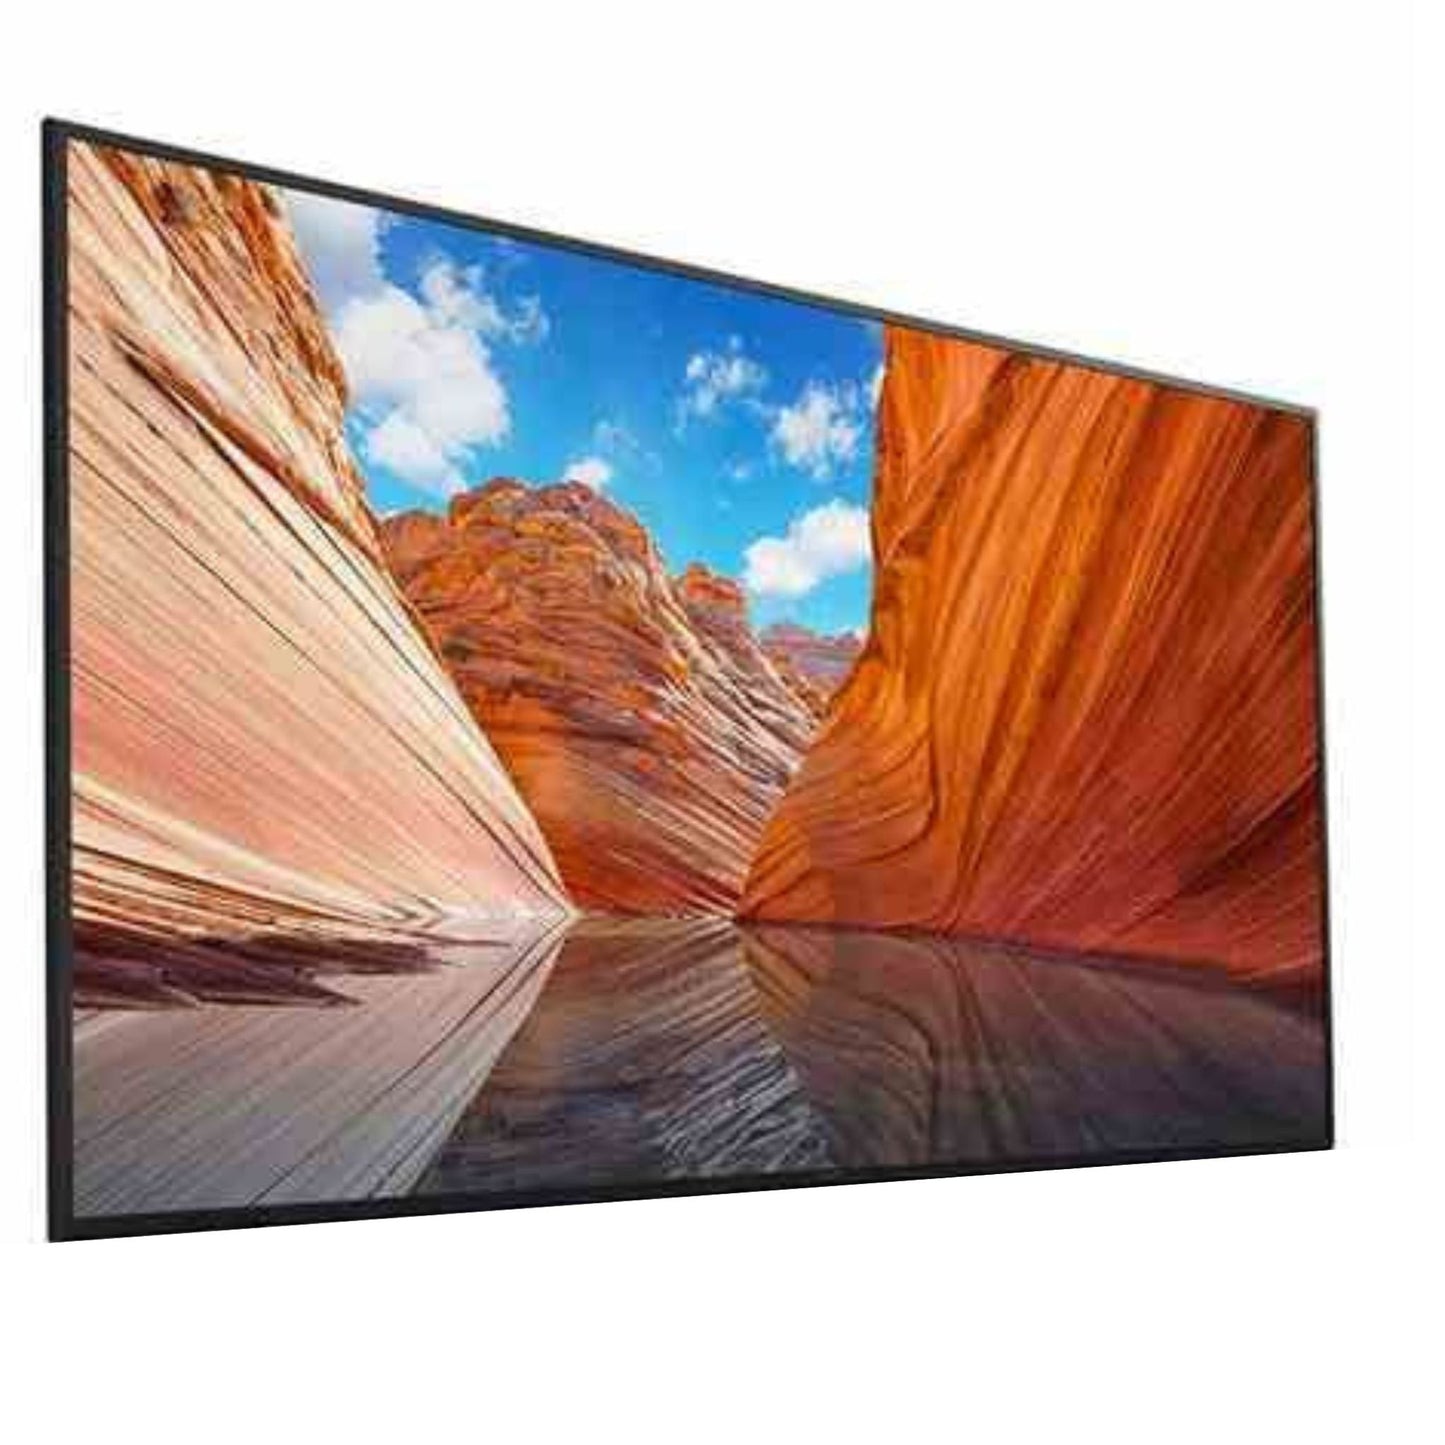 Sony 55 inch Smart Android TV, 55X80J